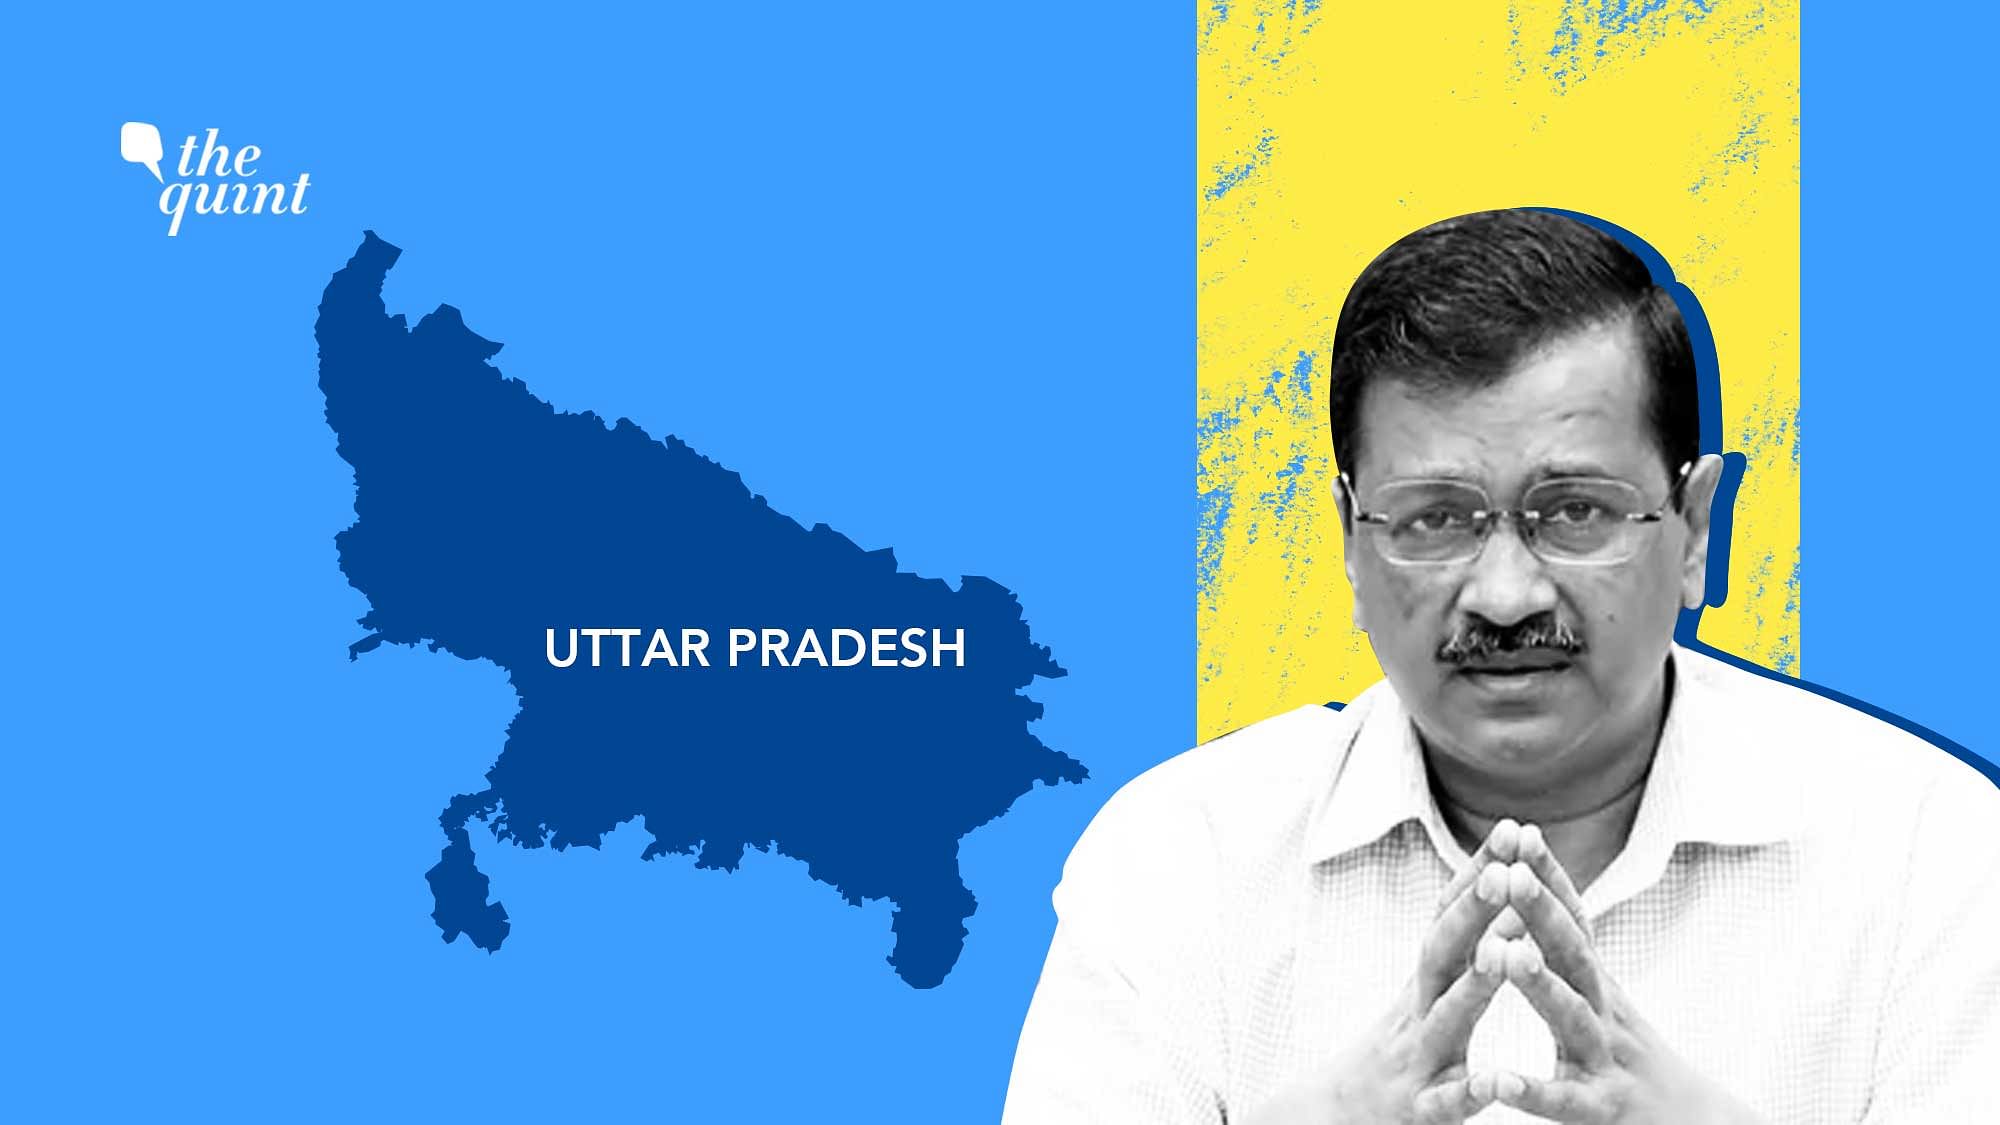 Image of UP map and Arvind Kejriwal used for representational purposes.